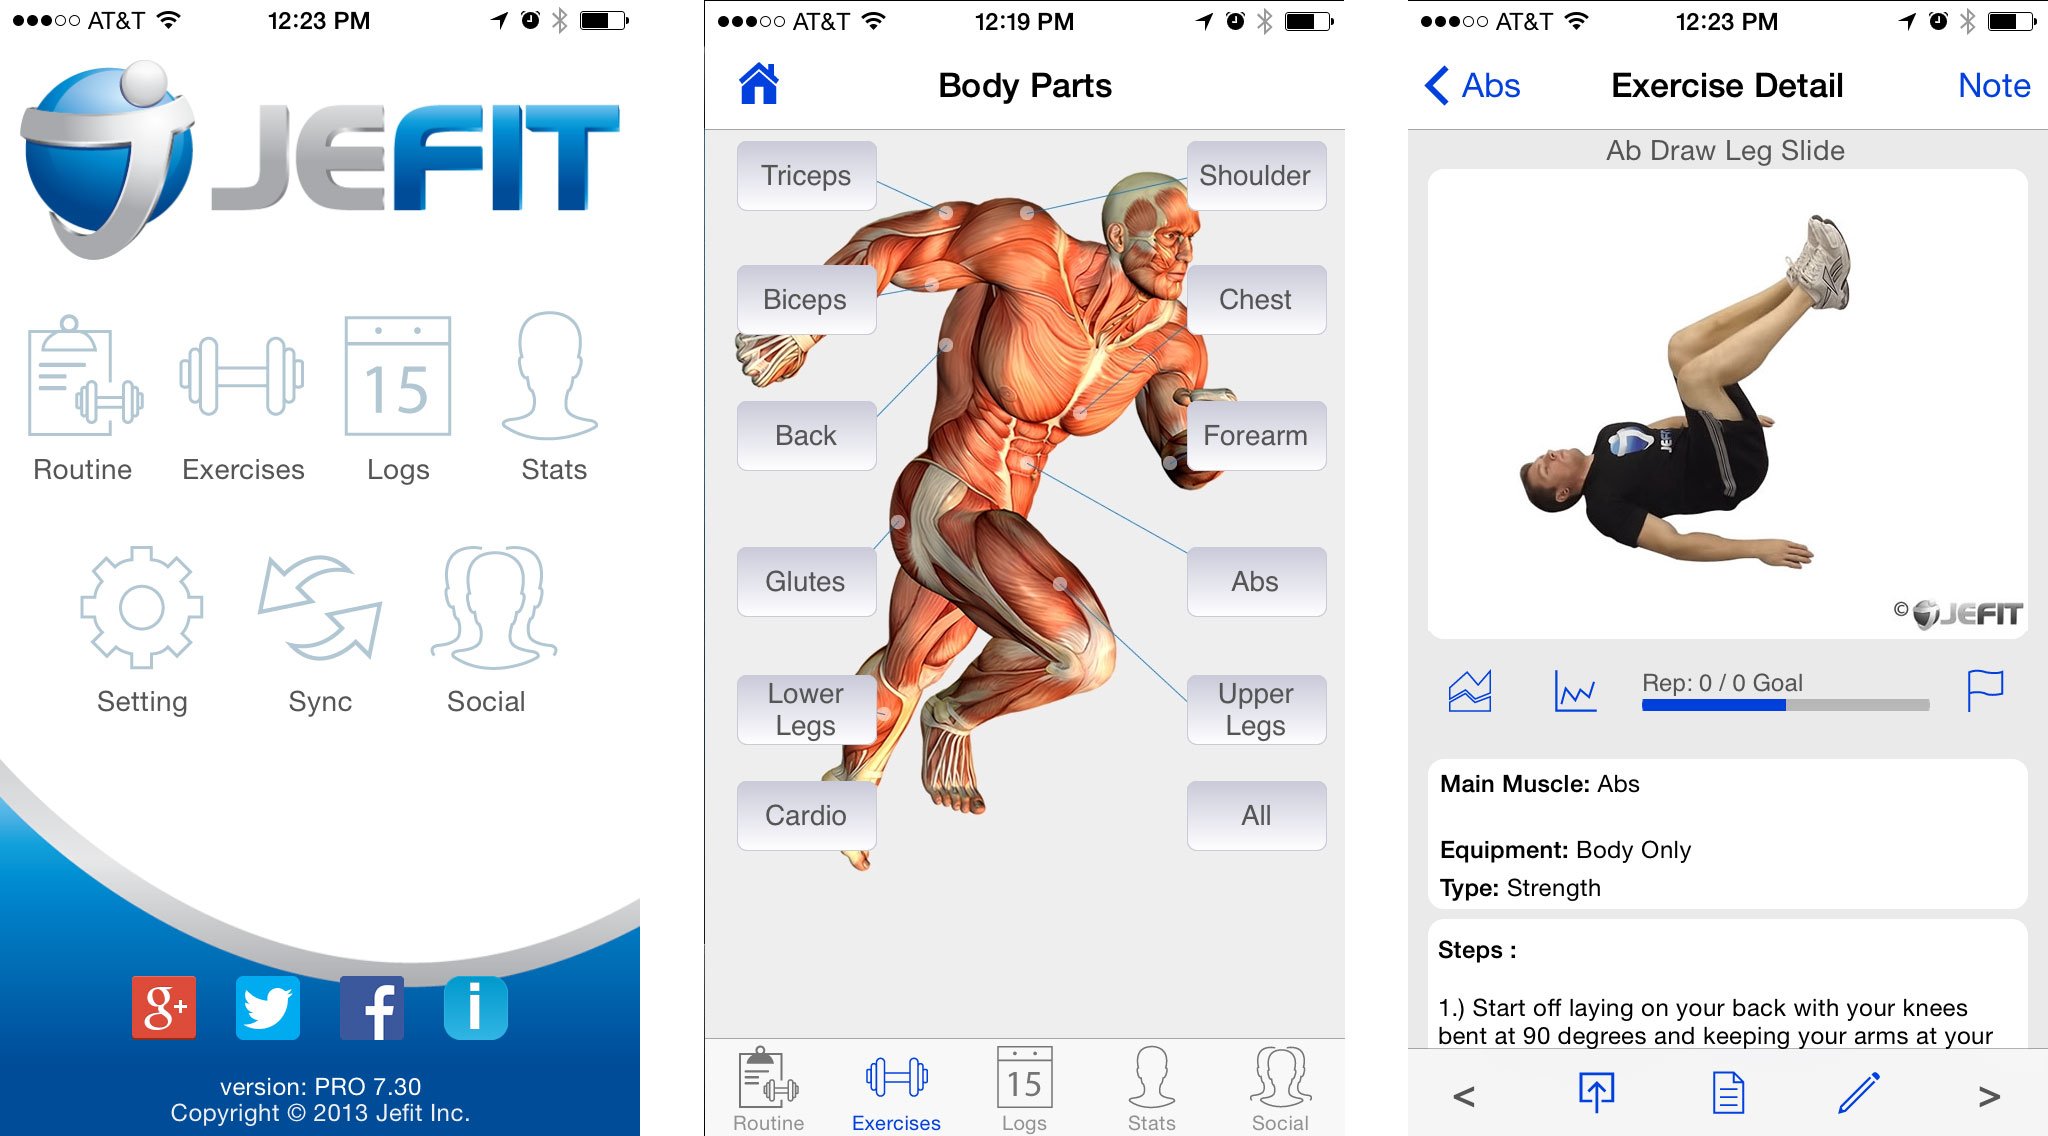 Best workout apps for iPhone: JEFIT